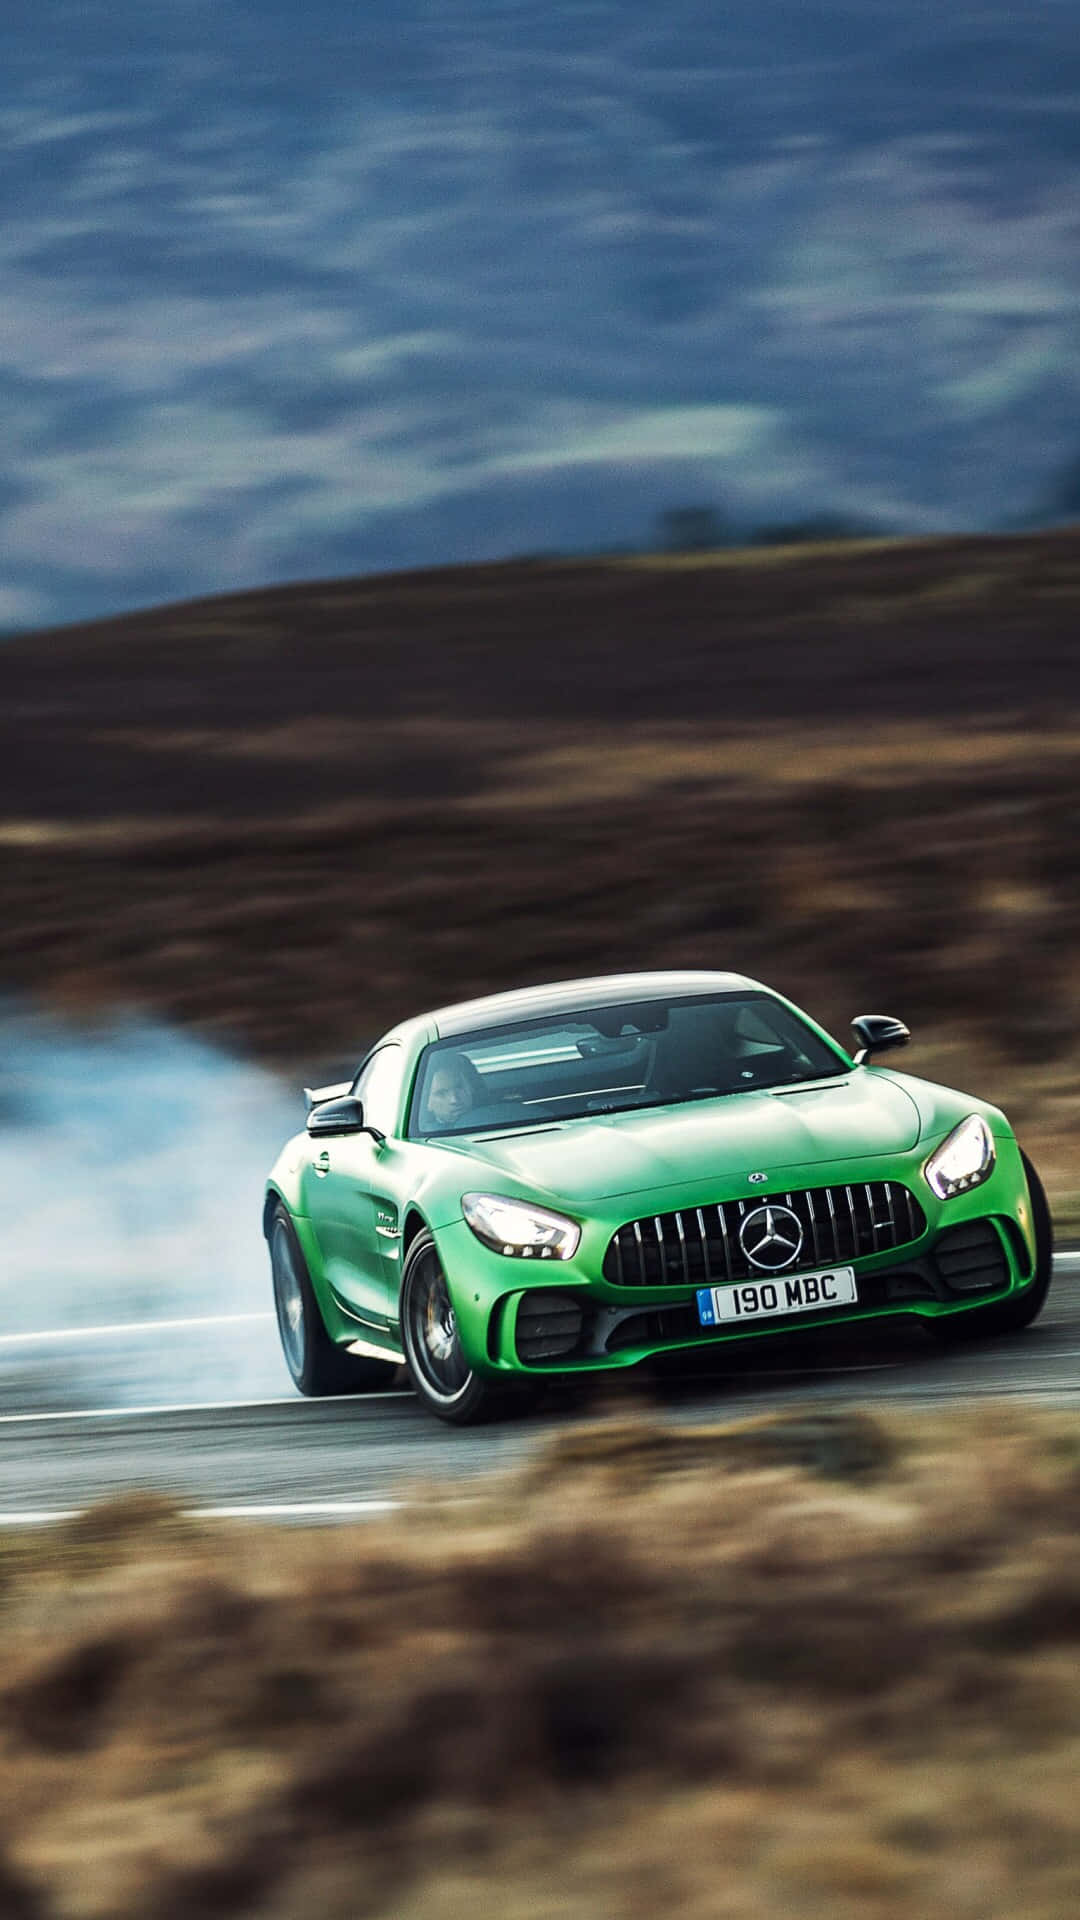 Blurry Aesthetic Android Emerald Green  Amg Gt-r Background